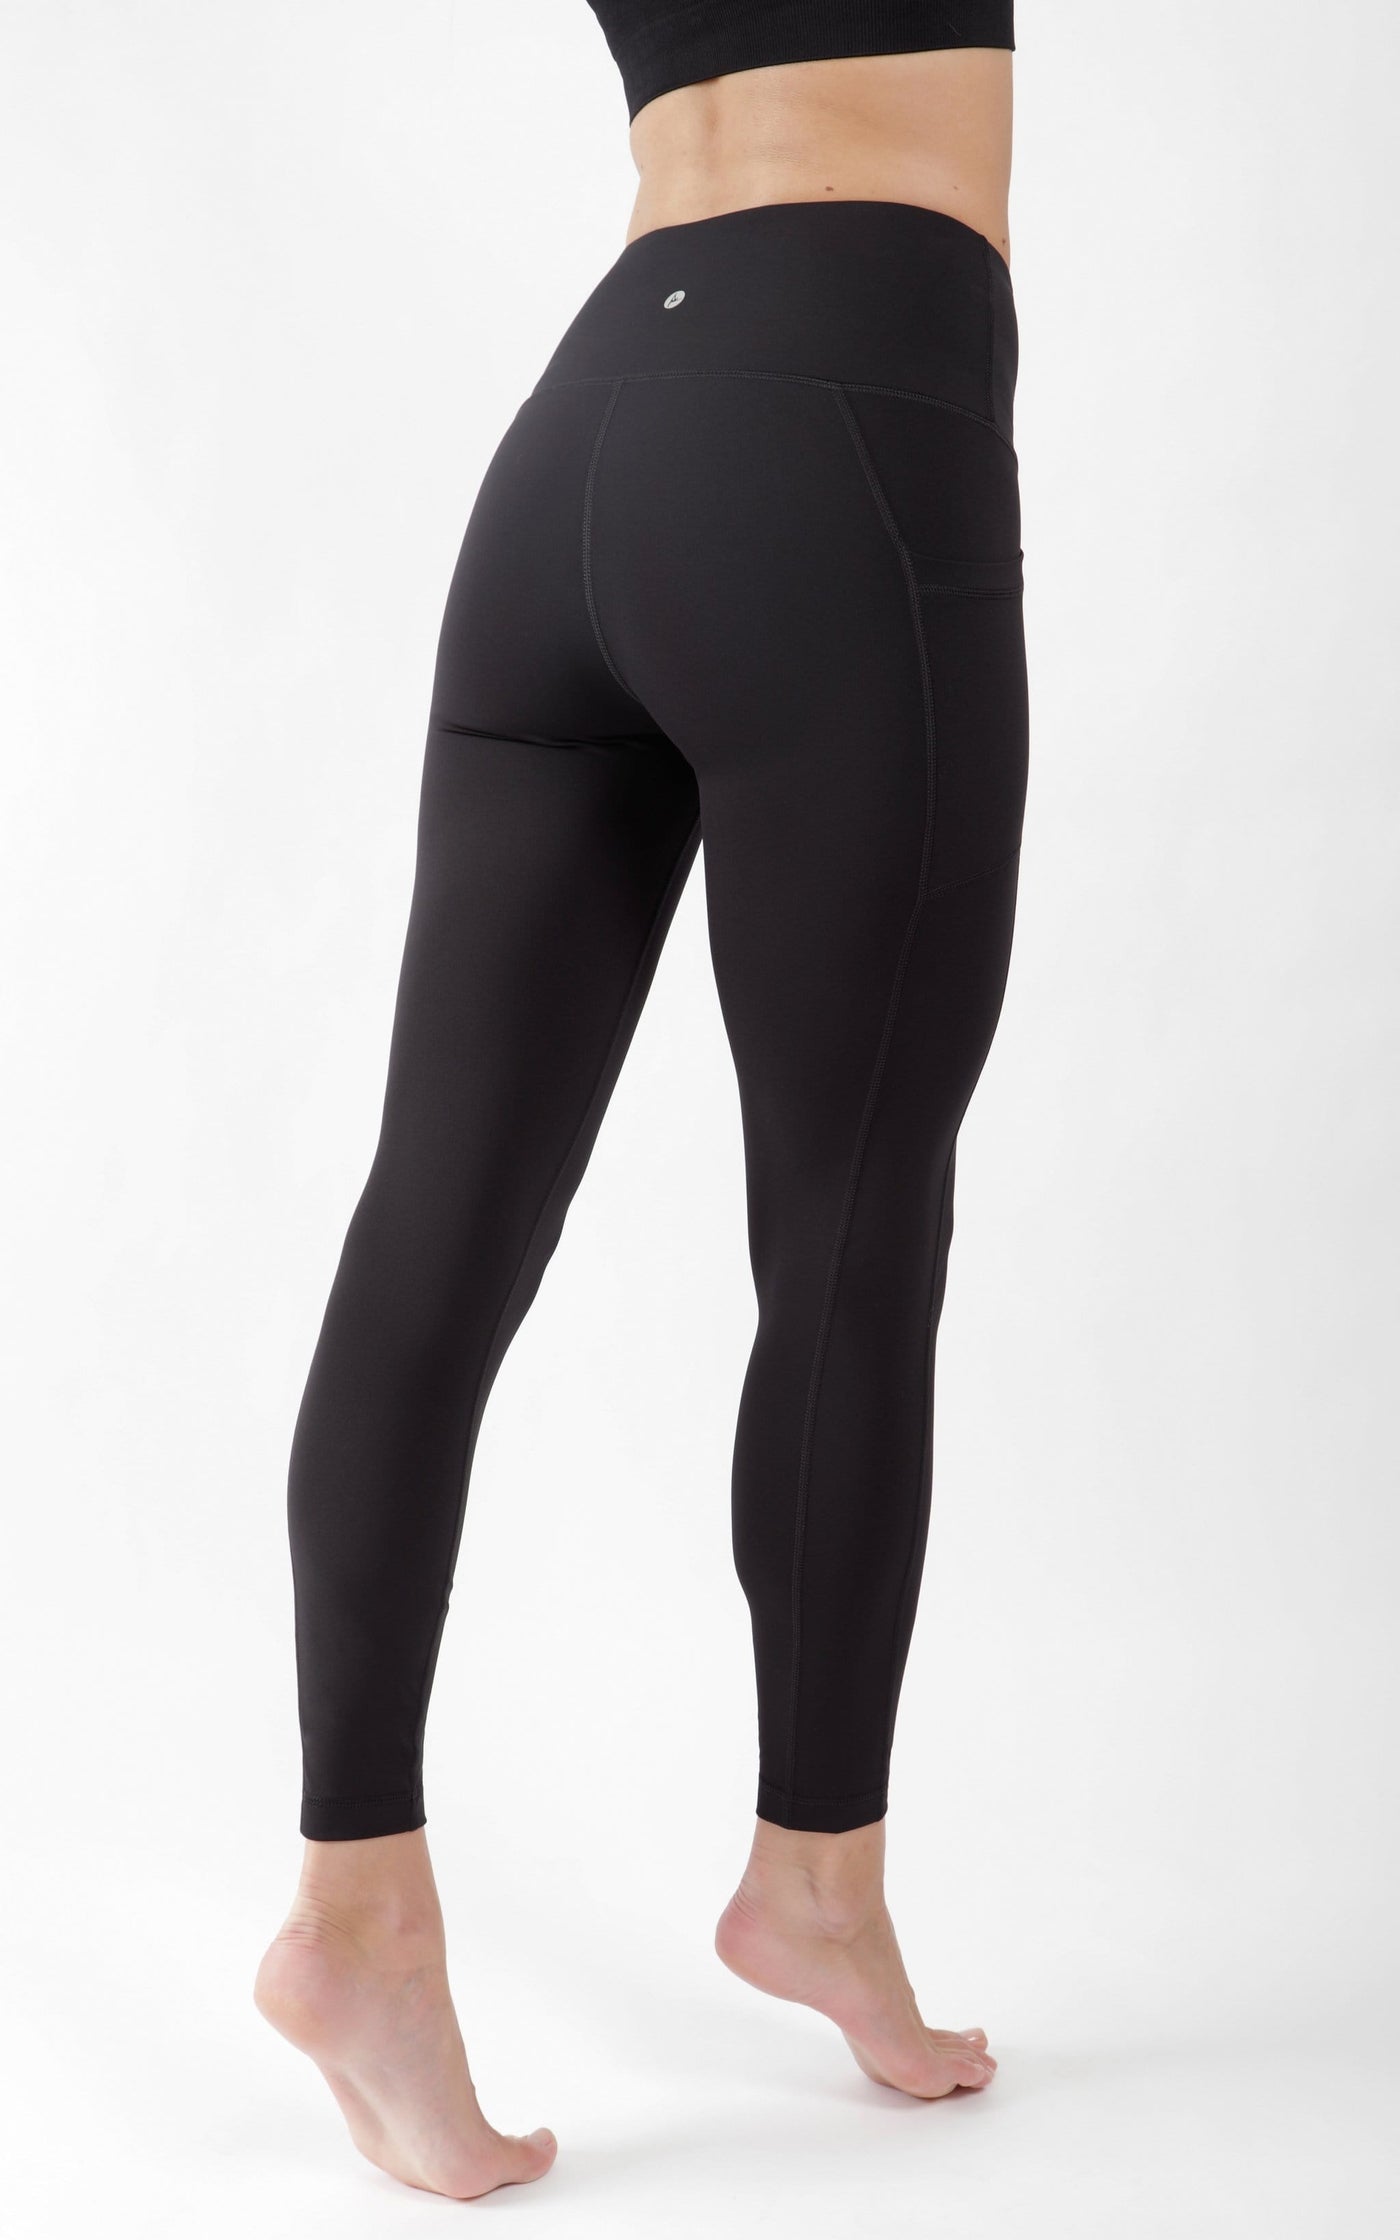 The 25 Best Squat-Proof Leggings for All Workouts - PureWow